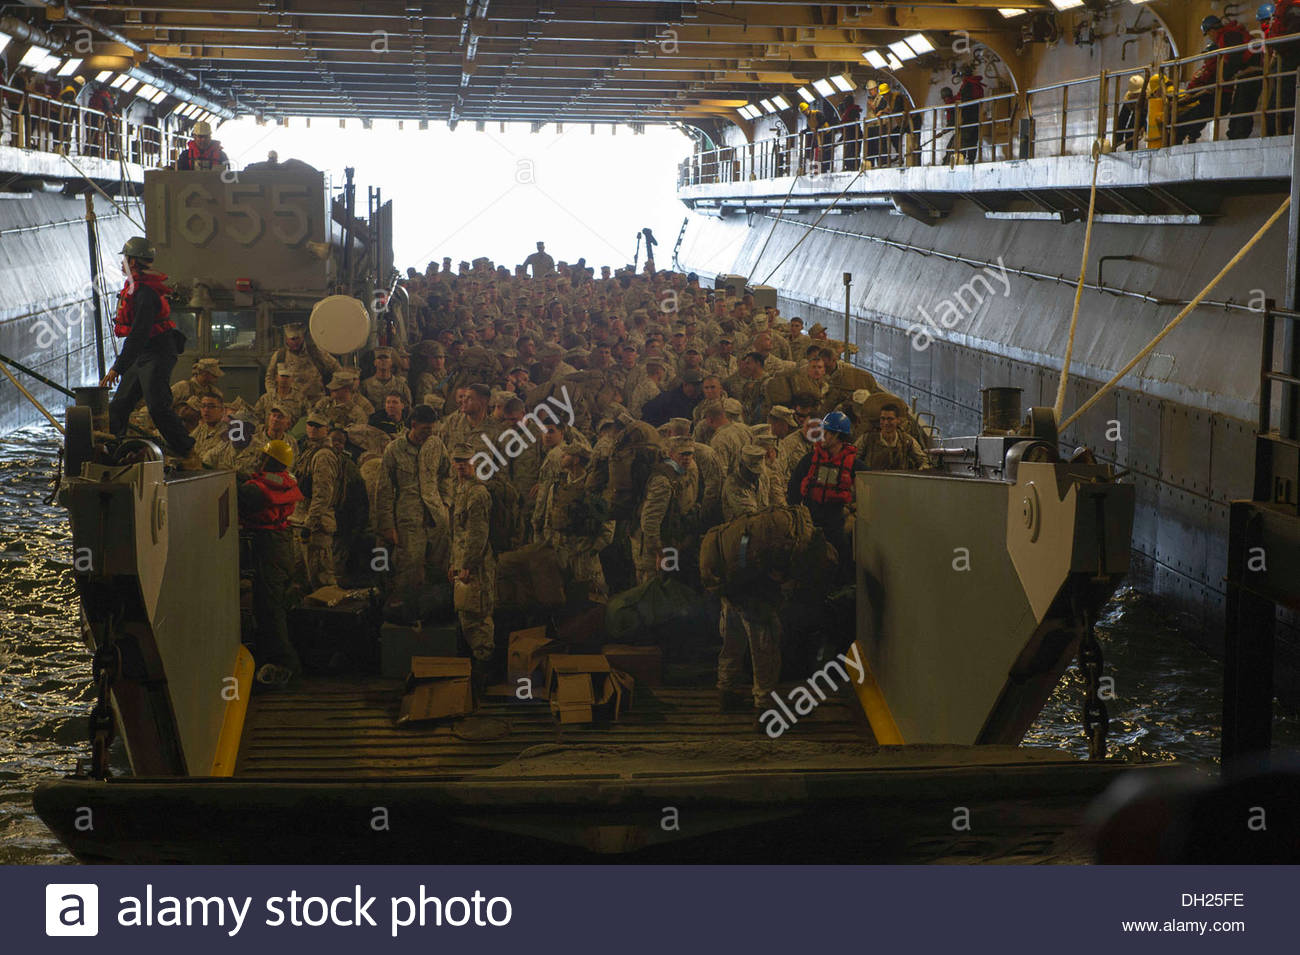 marines-arrive-on-a-landing-craft-utility-lcu-in-the-well-deck-of-DH25FE.jpg